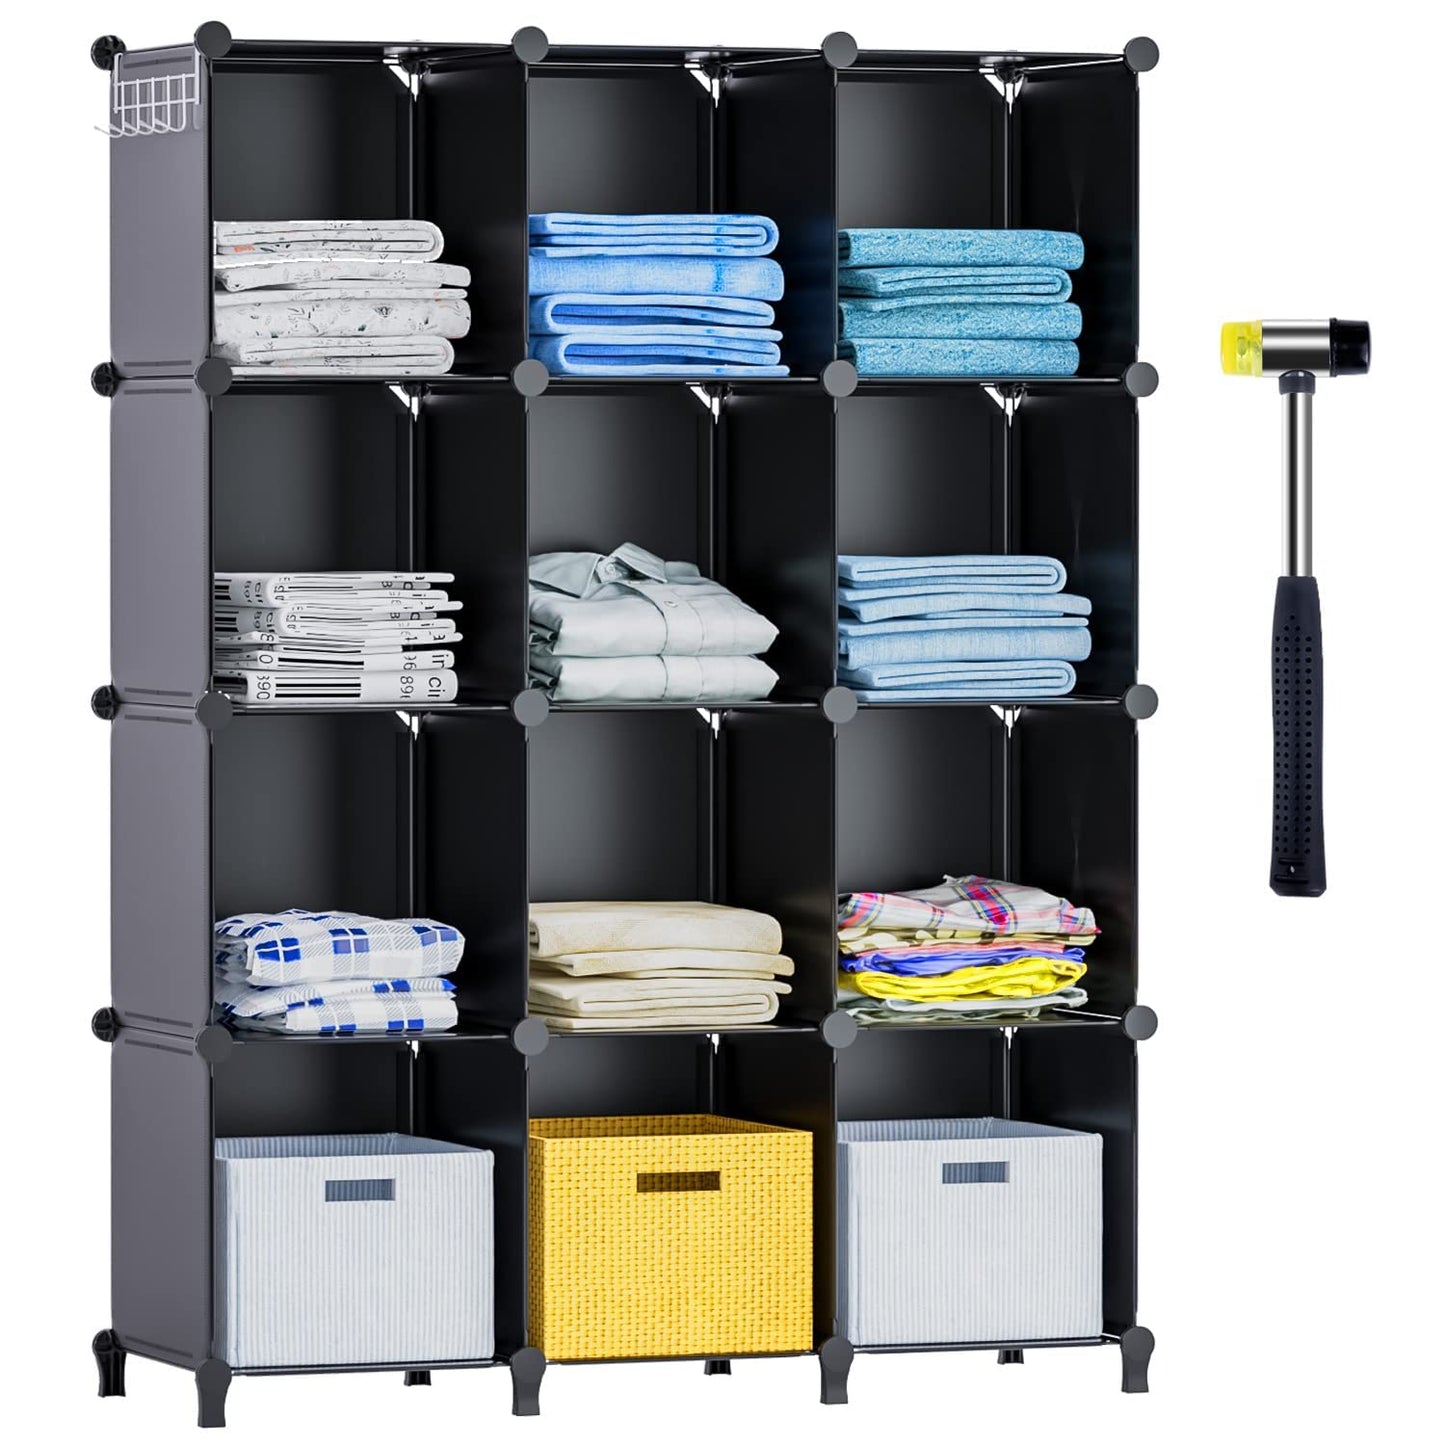 Cube Storage Organizer, 12 Cube Closet Organizers and Storage for Bedroom, Plastic Portable Closet Cube Shelf for Books,Toys and Clothing with Hammer